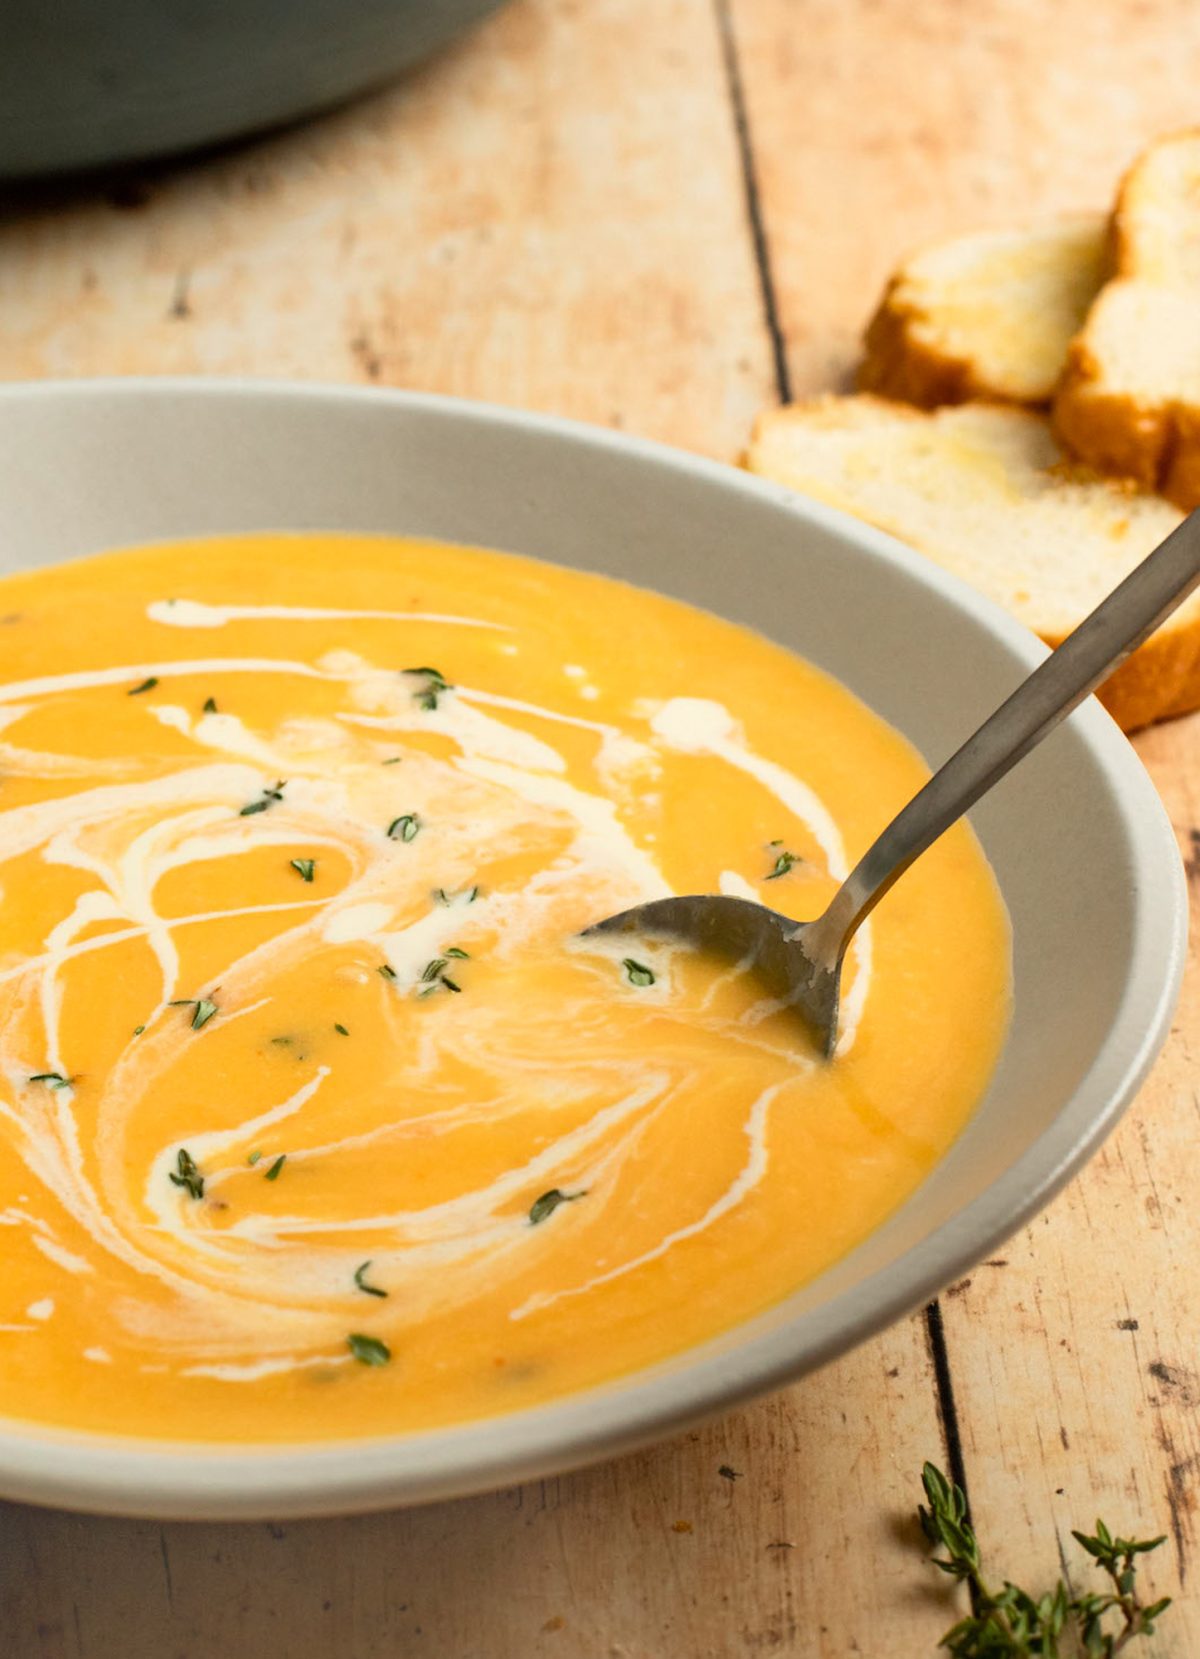 Spoon in a bowl of butternut squash soup.